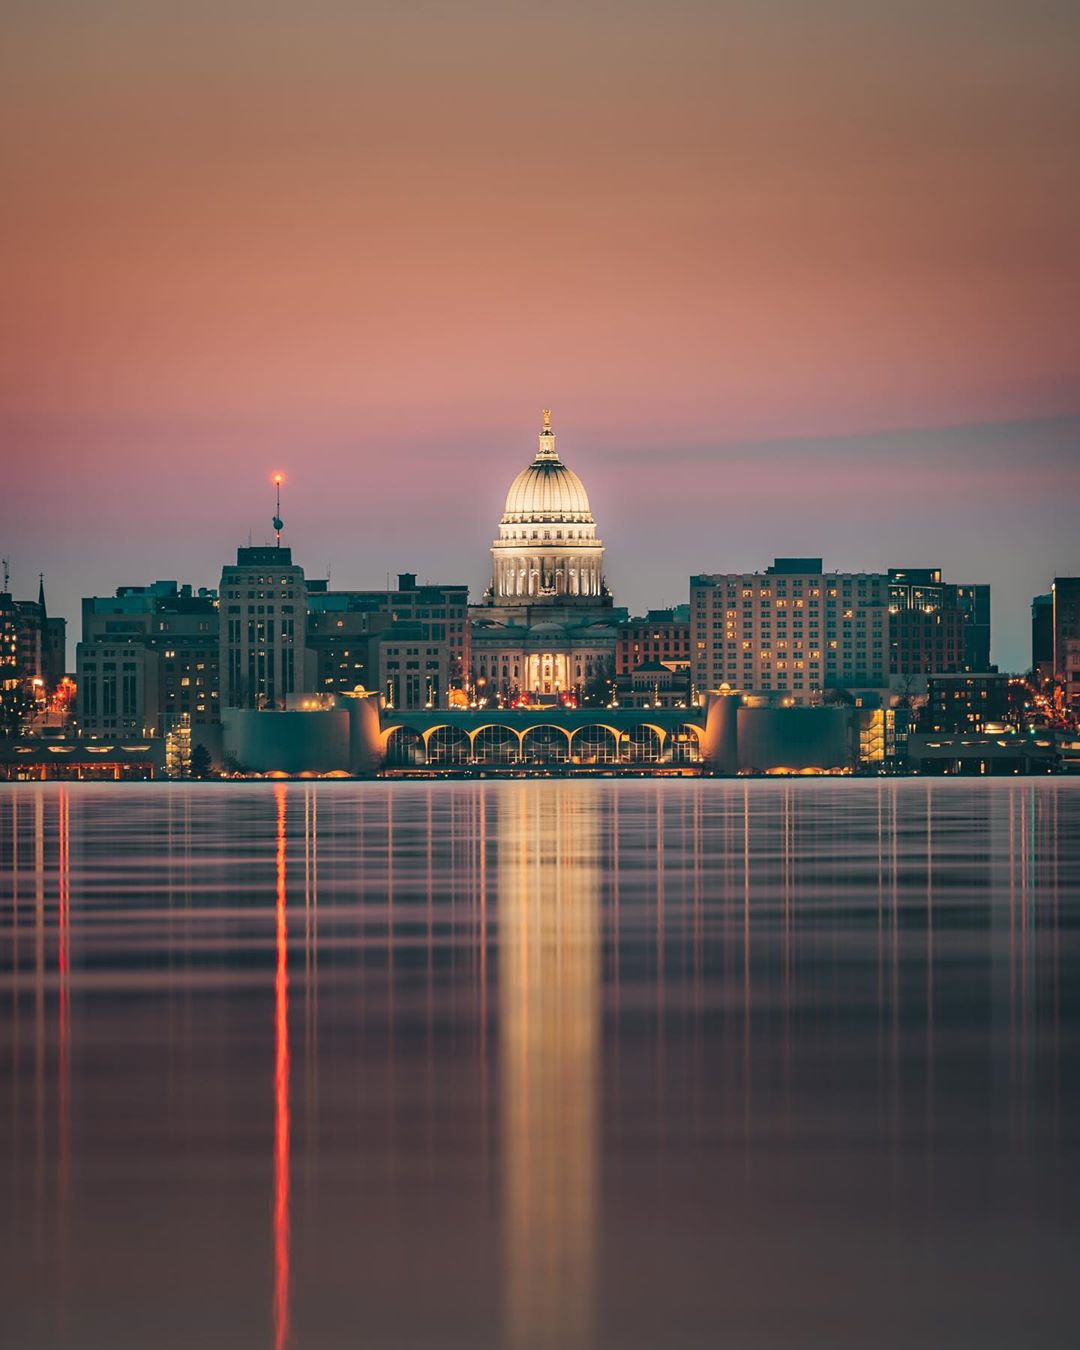 Wisconsin Capital Building in Madison and Downtown from Lake Monona. Photo by Instagram user @samuelli